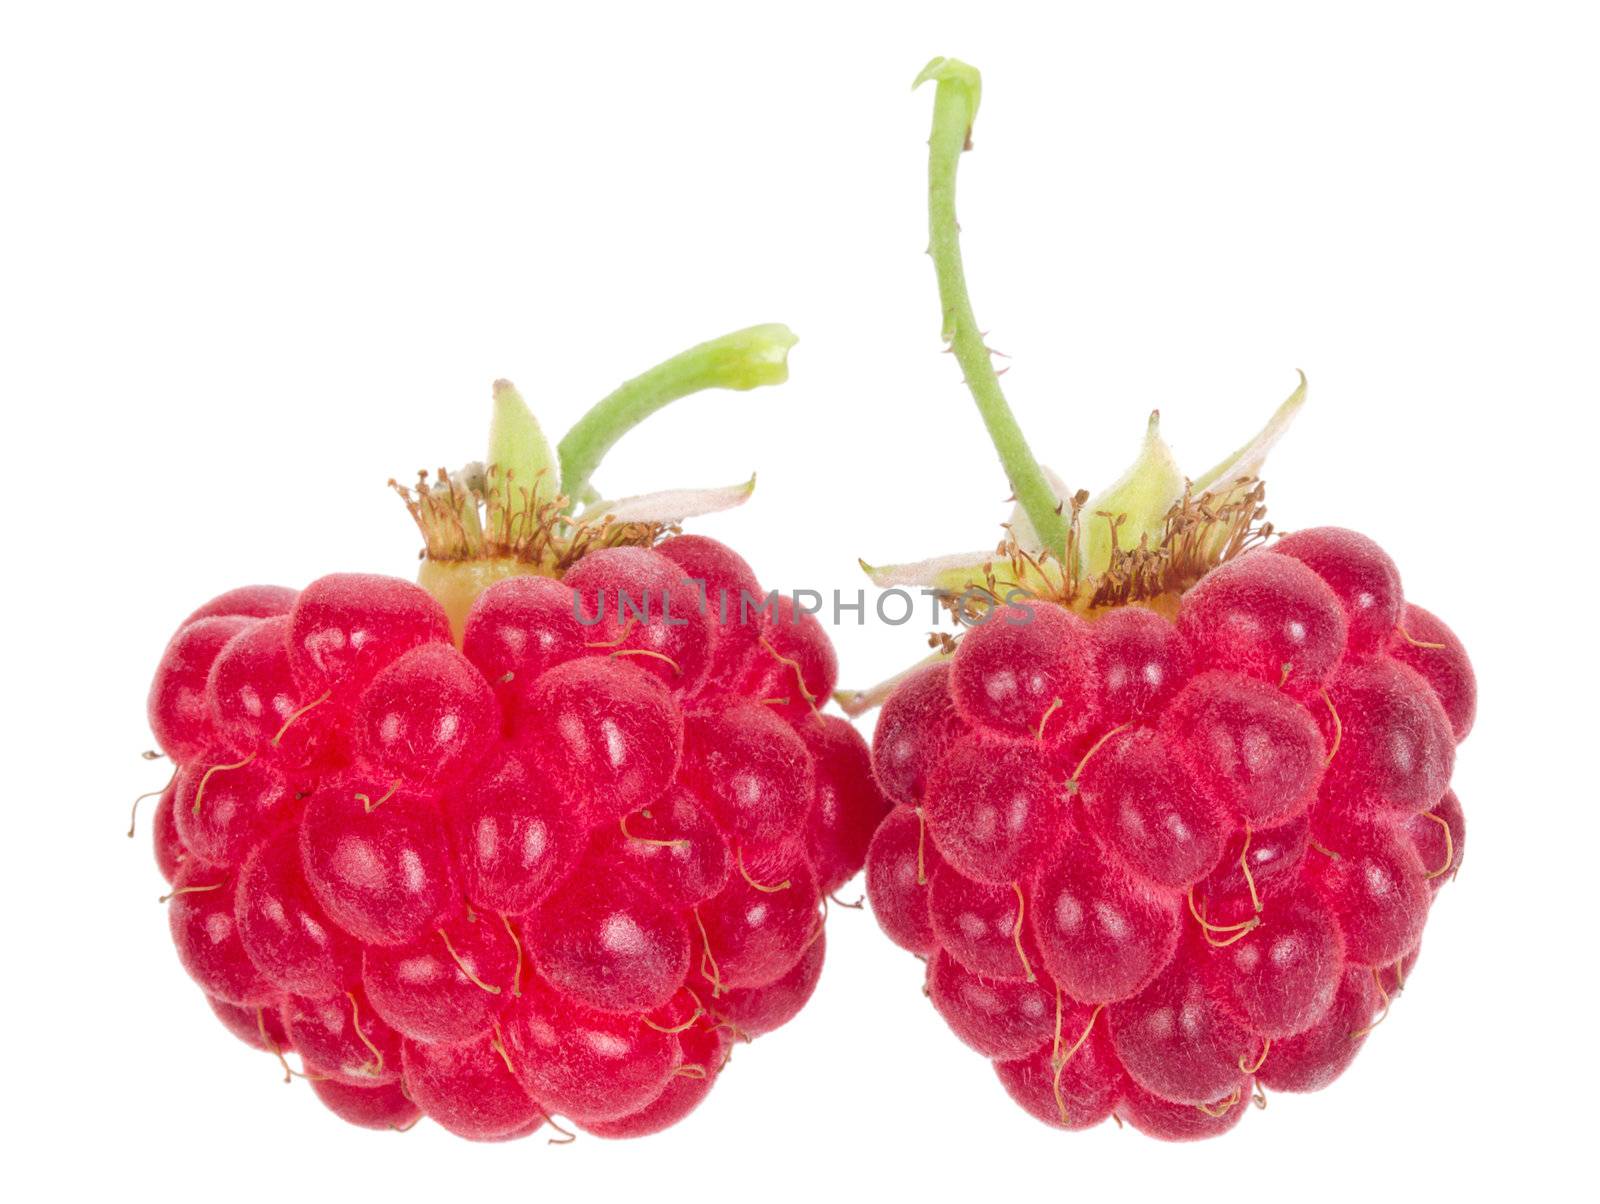 two ripe raspberries, isolated on white